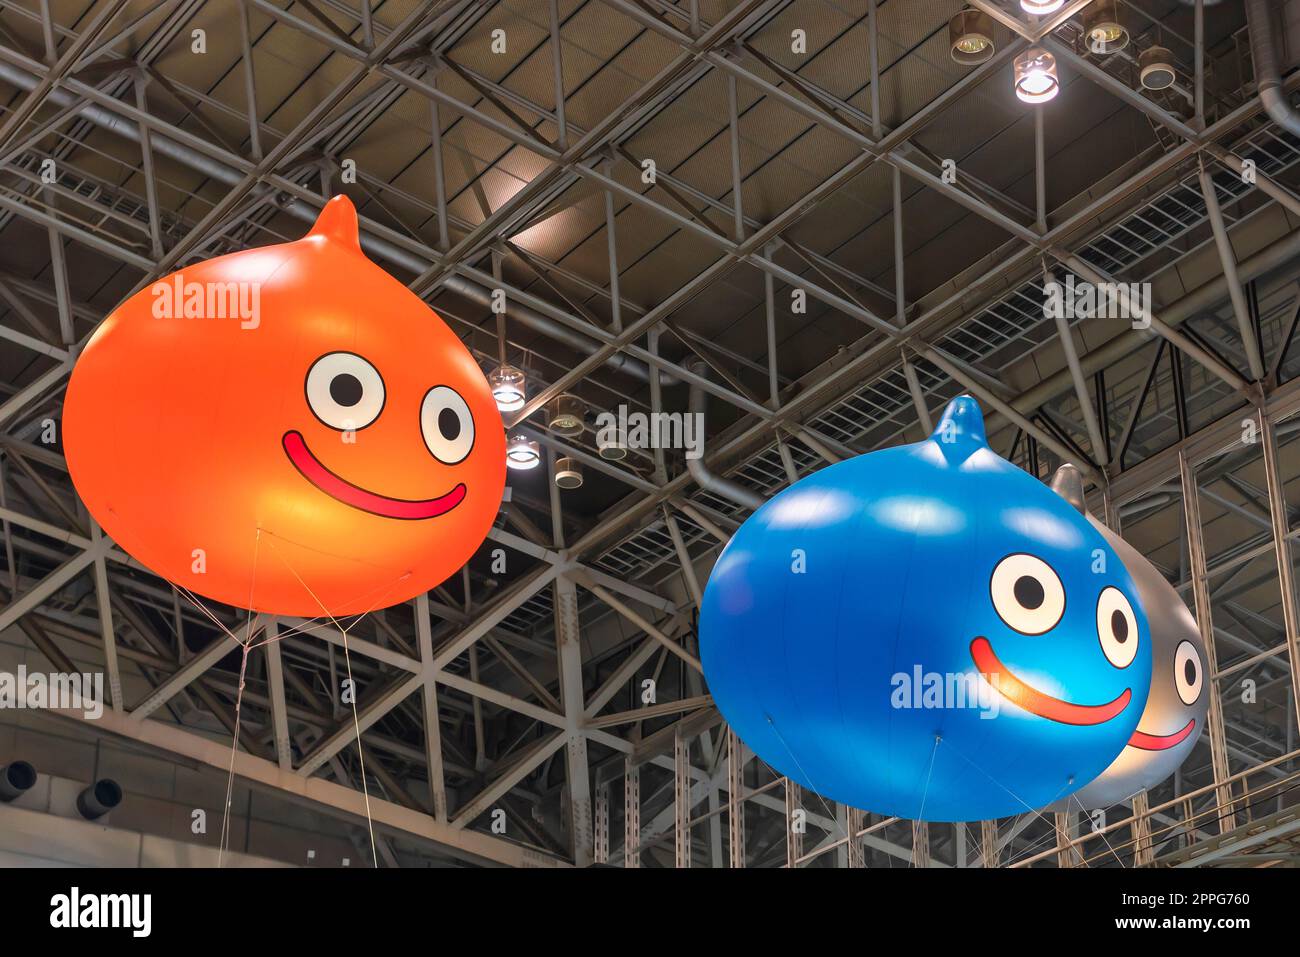 chiba, japan - december 22 2018:  Huge inflatable balloons depicting Slime, the mascot of the Dragon Quest role-playing video game floating under the ceiling of the anime convention Jump Festa 19. Stock Photo